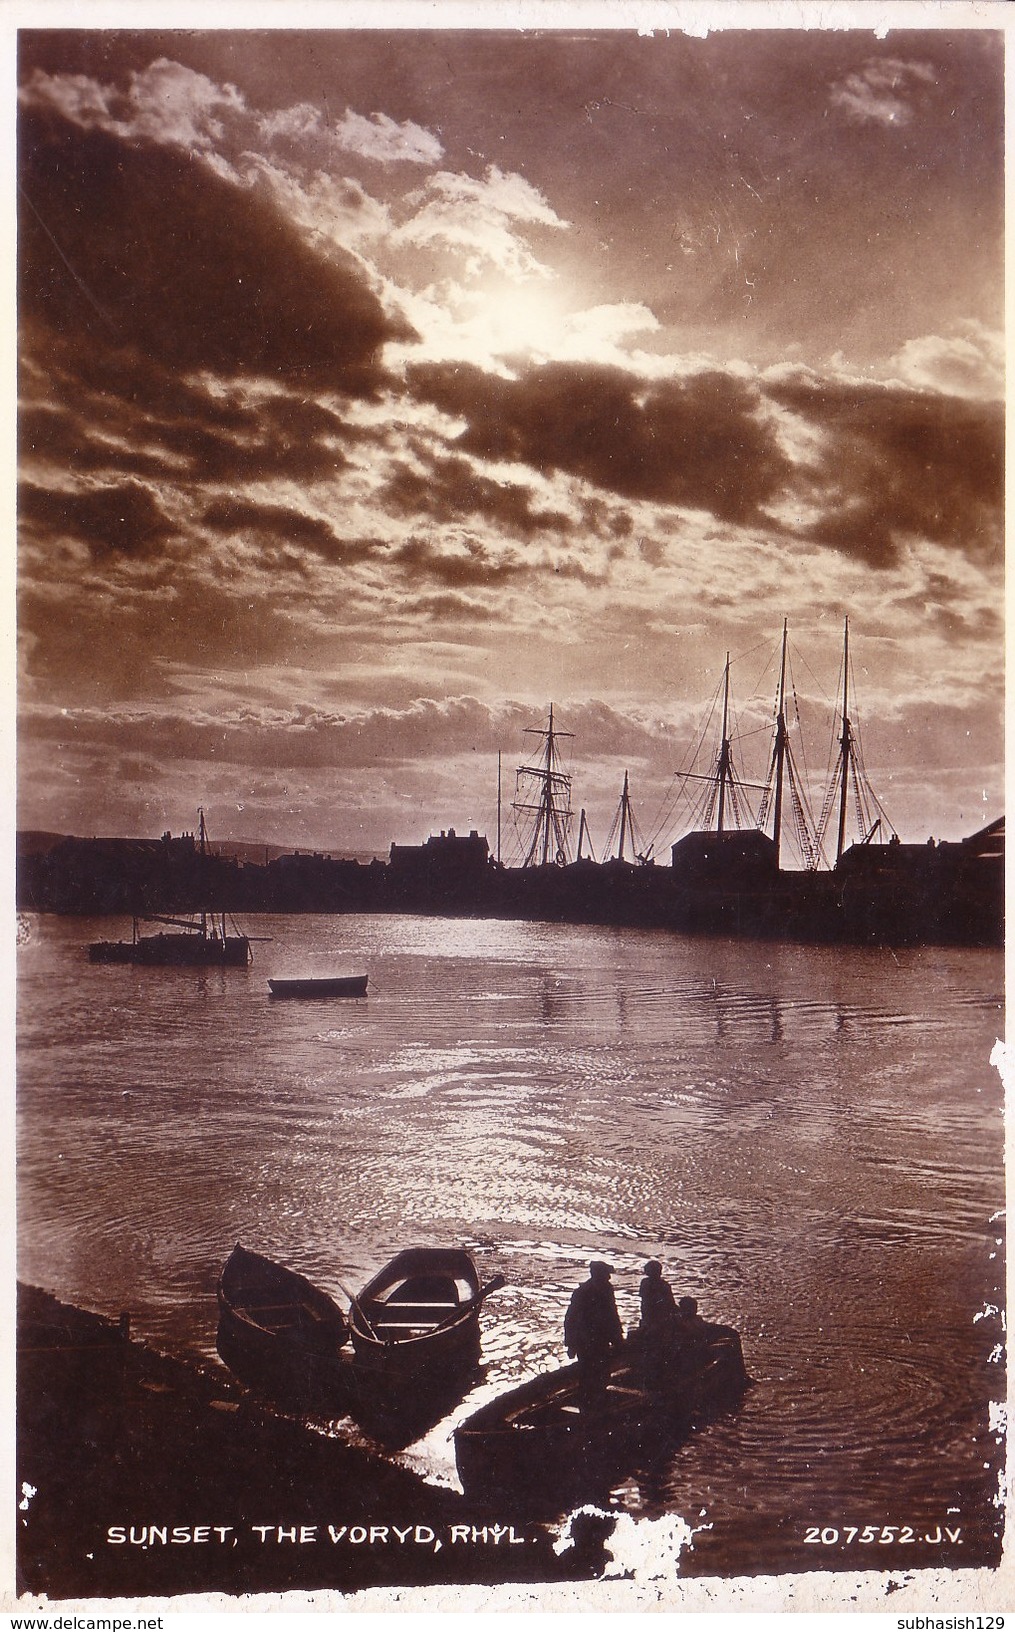 OLD AND ANTIQUE COLOUR PHOTO PICTURE POST CARD PRINTED IN ENGLAND - SUNSET, THE VORYD, RHYL - TOURISM THEME - World